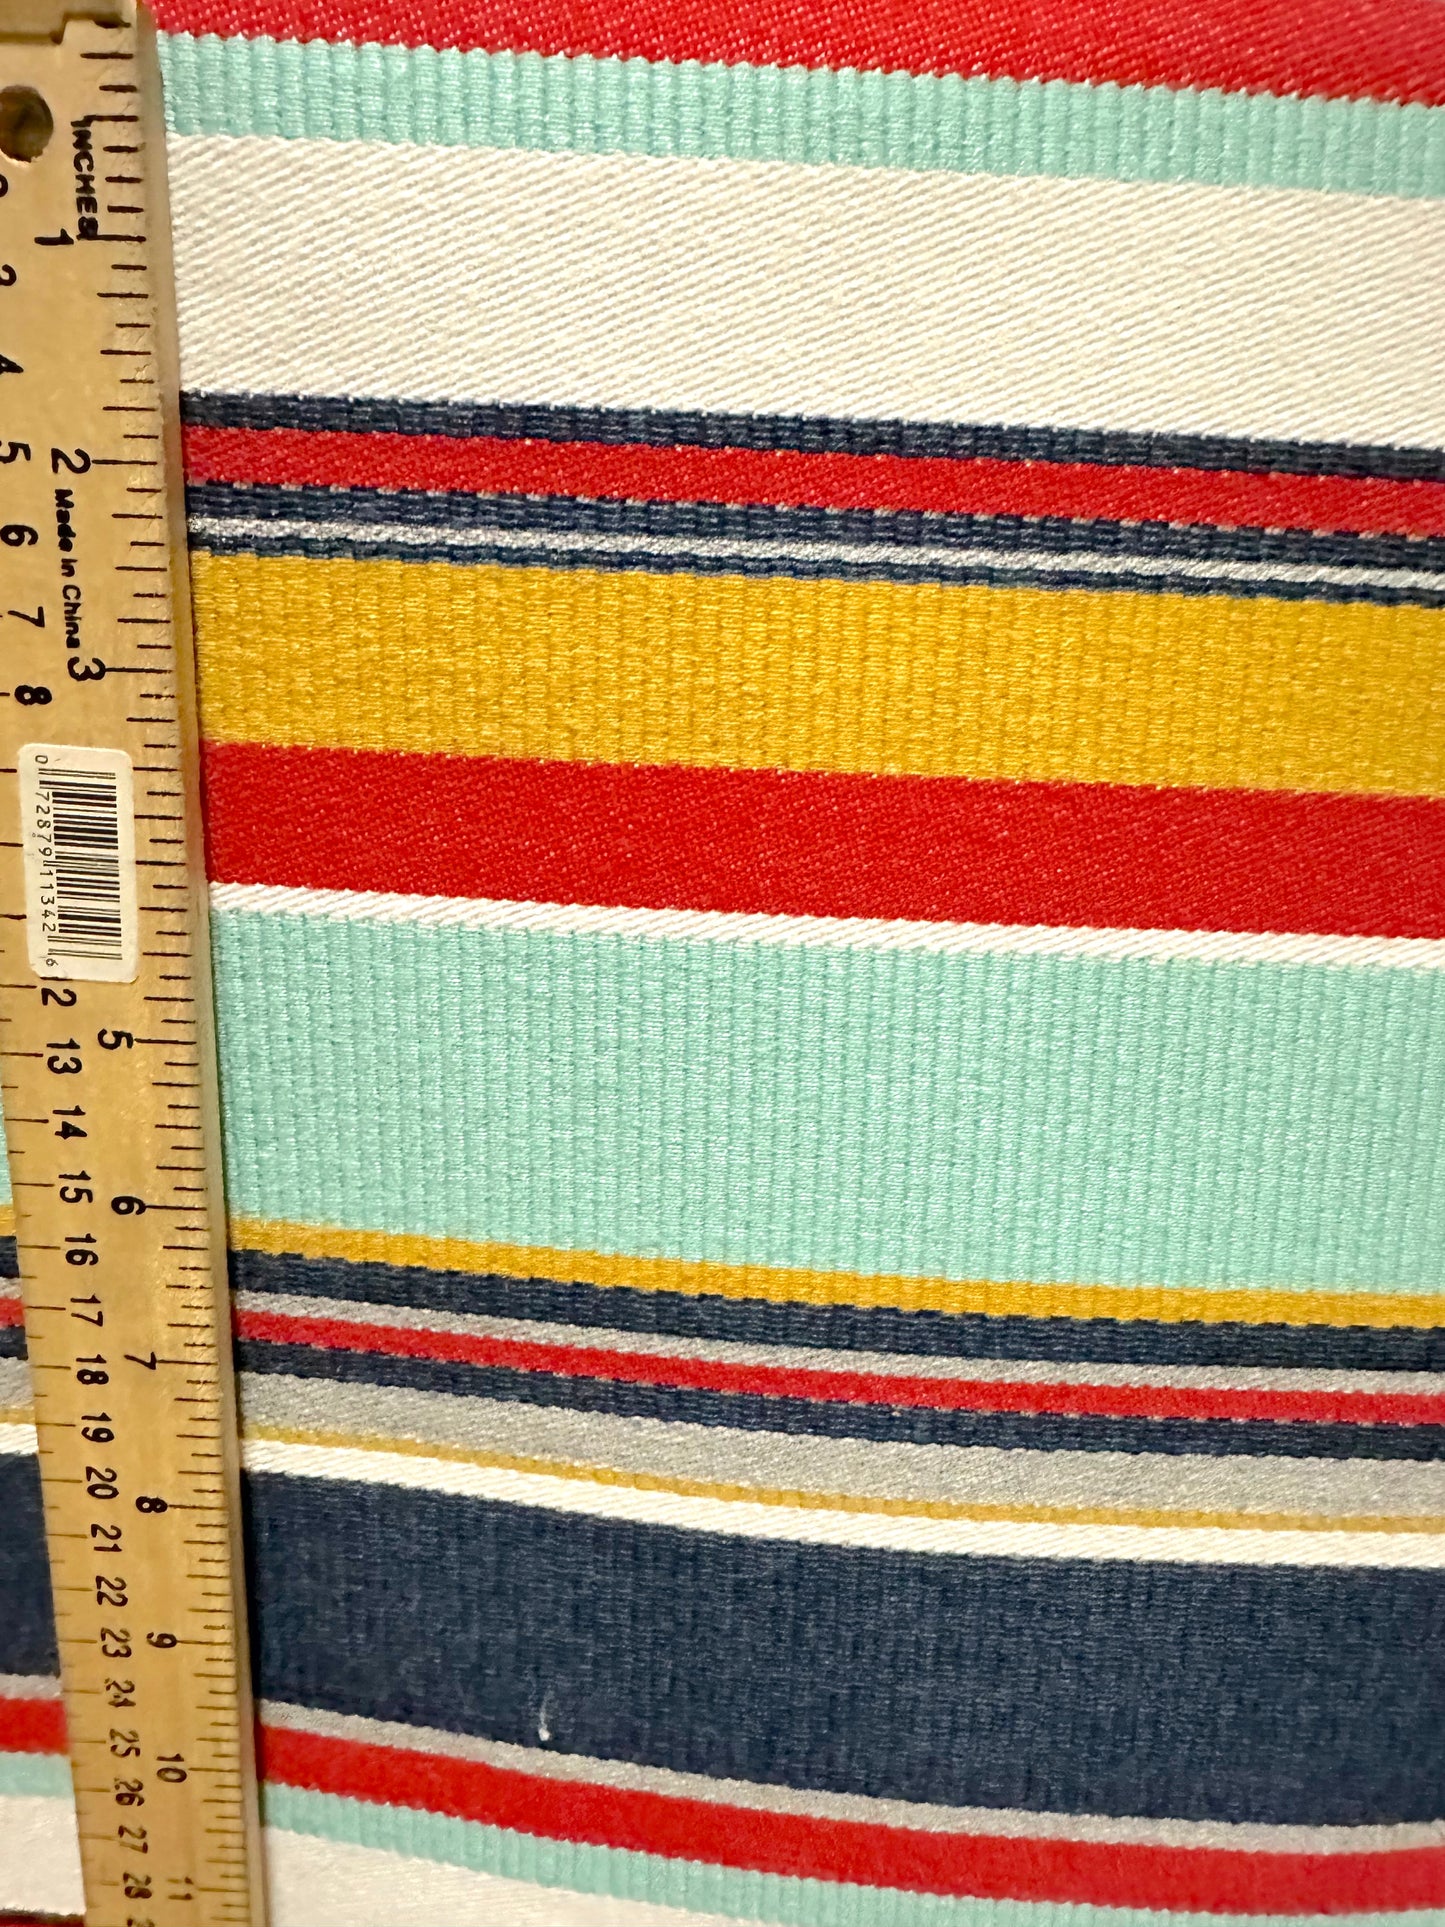 ETHAN ALLEN MULTI COLOR MULTI WEAVE STRIPE UPHOLSTERY FABRIC COTTON 56" WIDE BY THE YARD